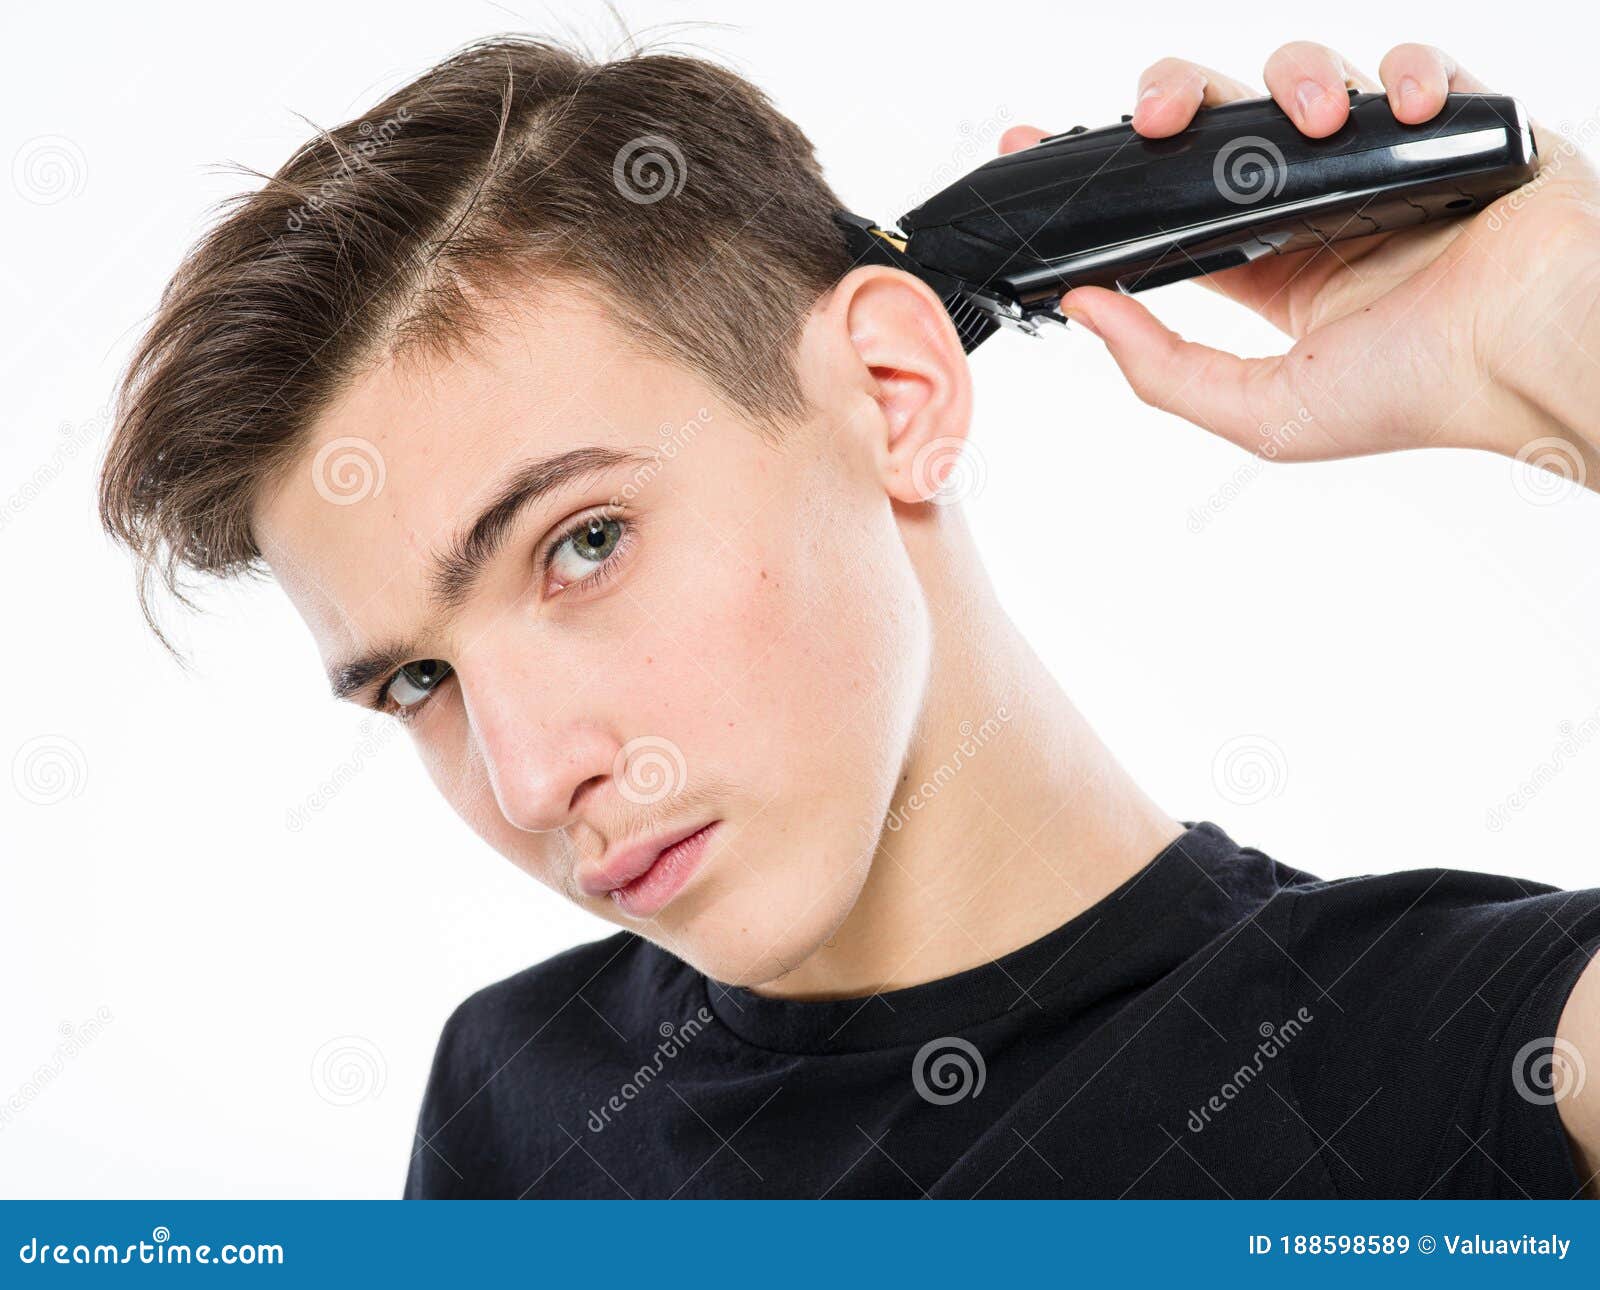 how to cut a guys hair with an electric razor